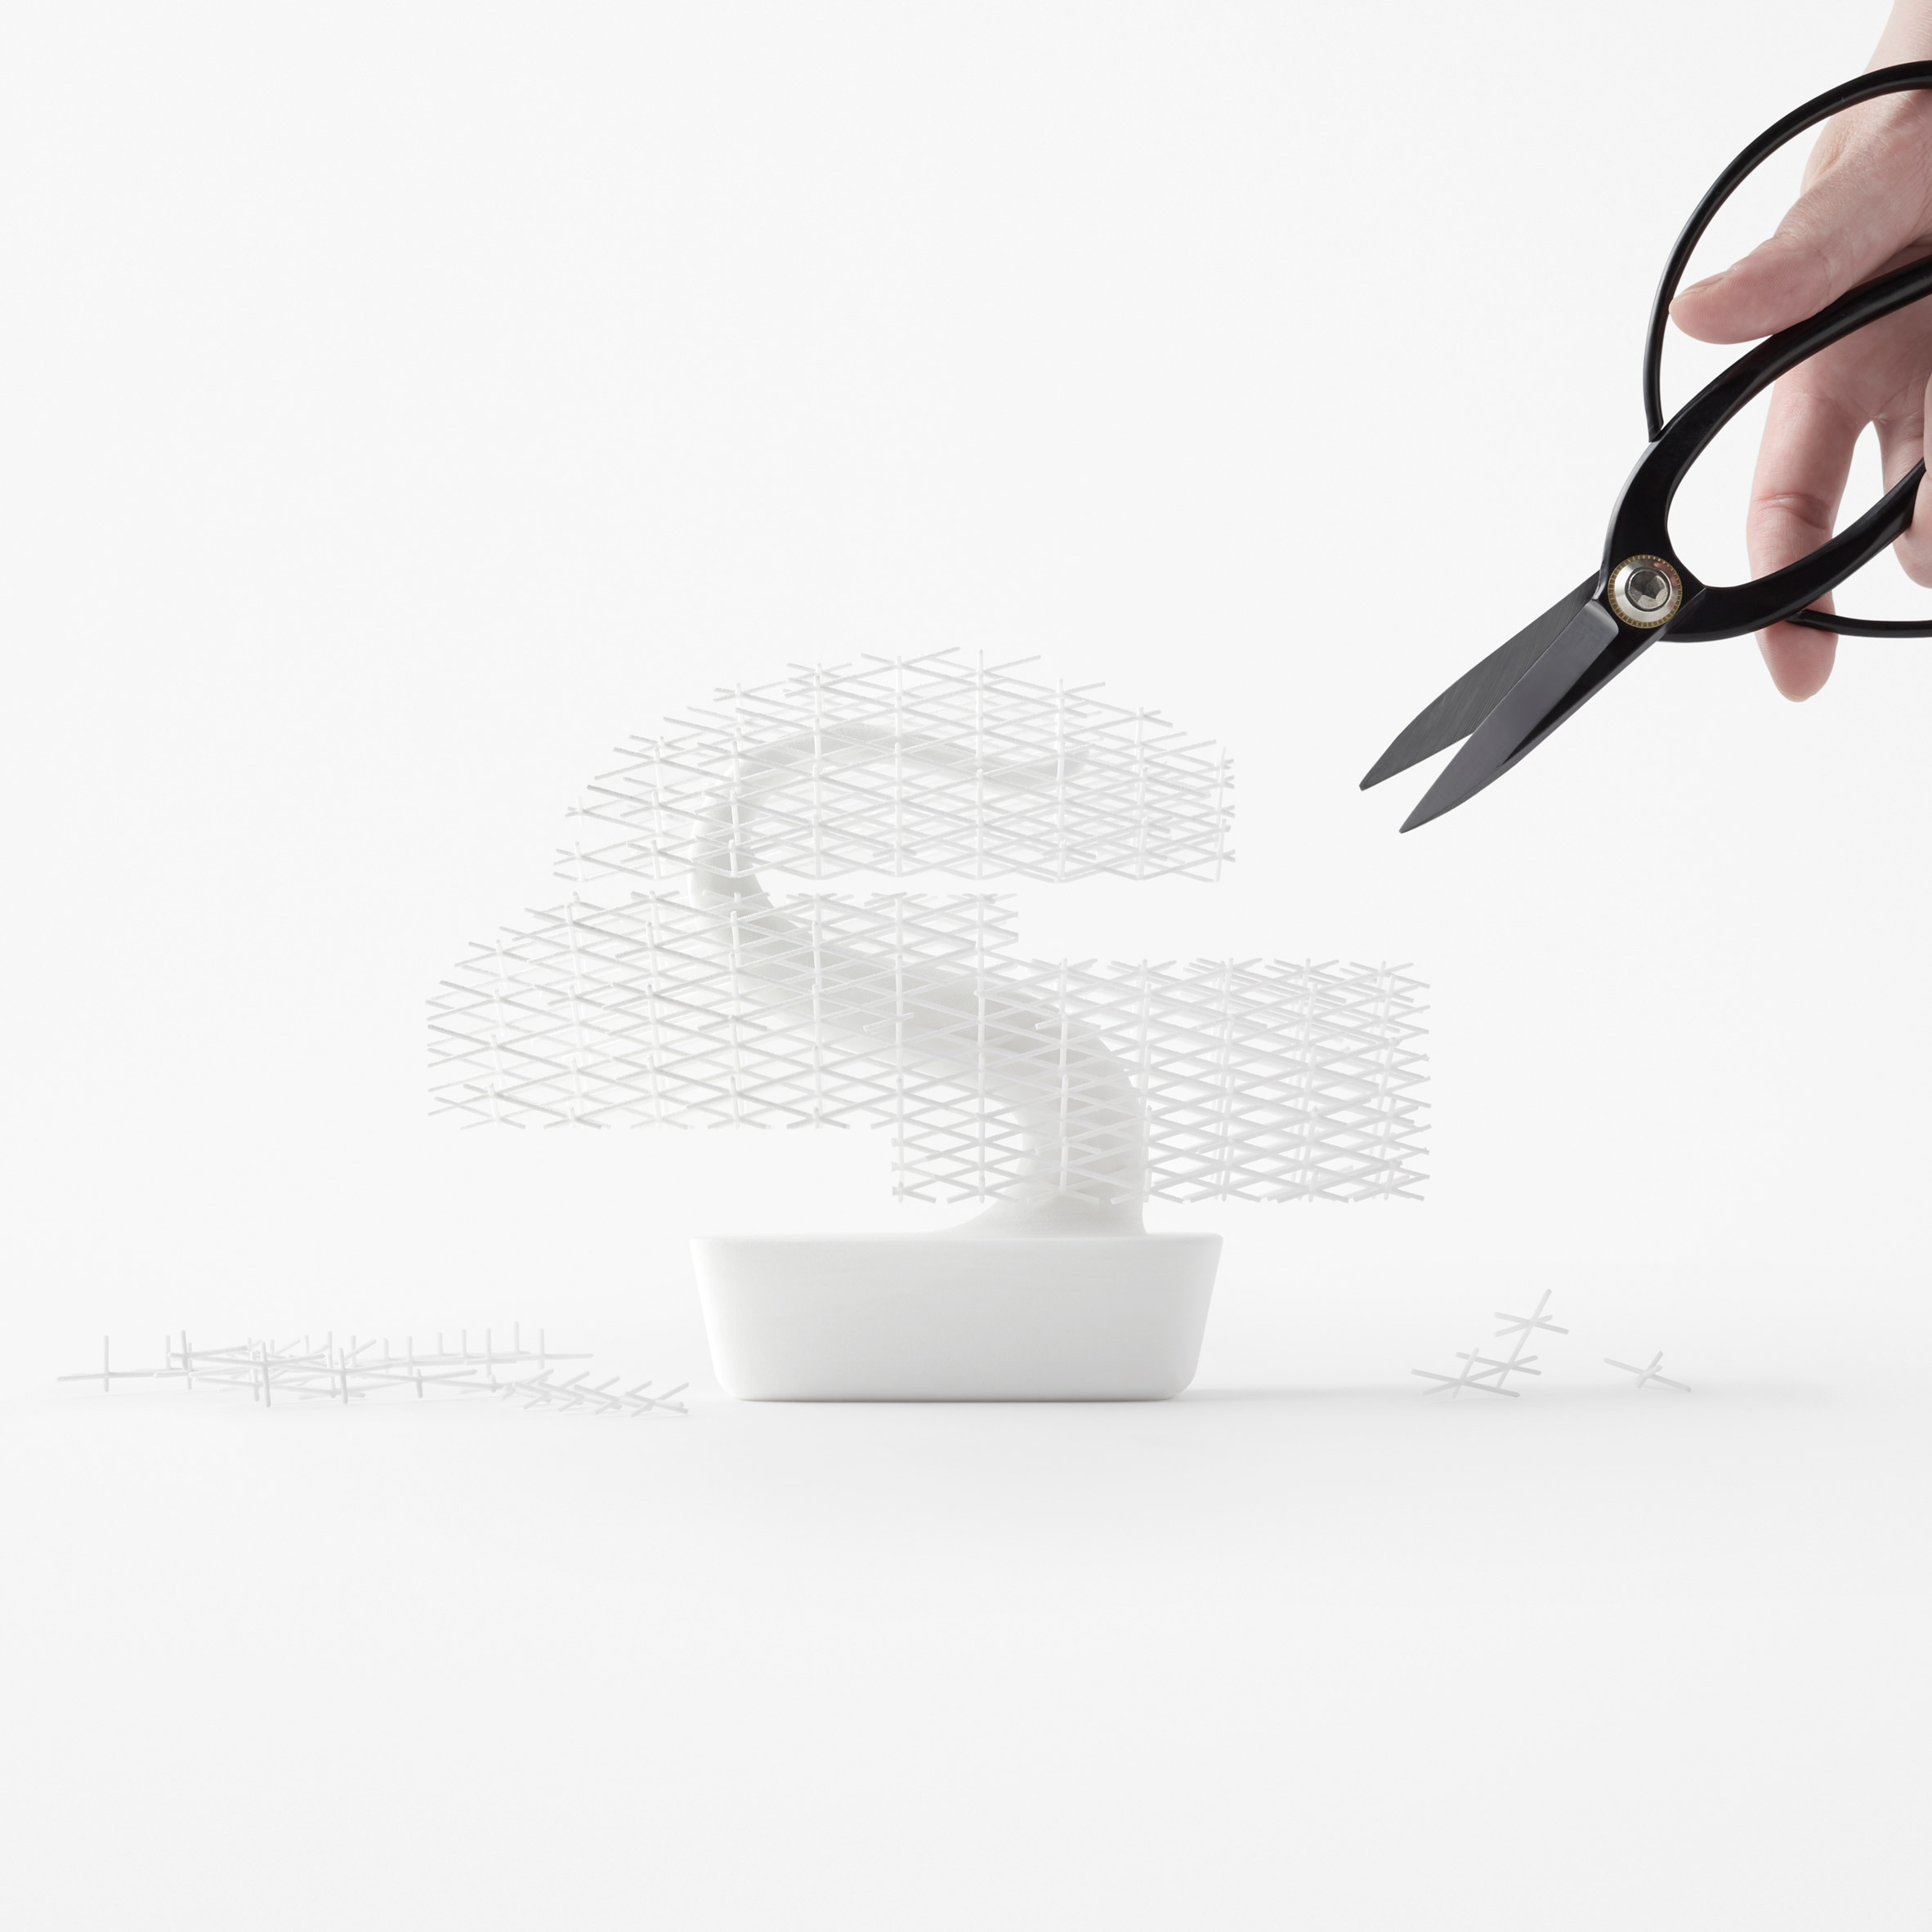 Nendo's 3D-printed Bonsai tree does away with meticulous plant maintenance